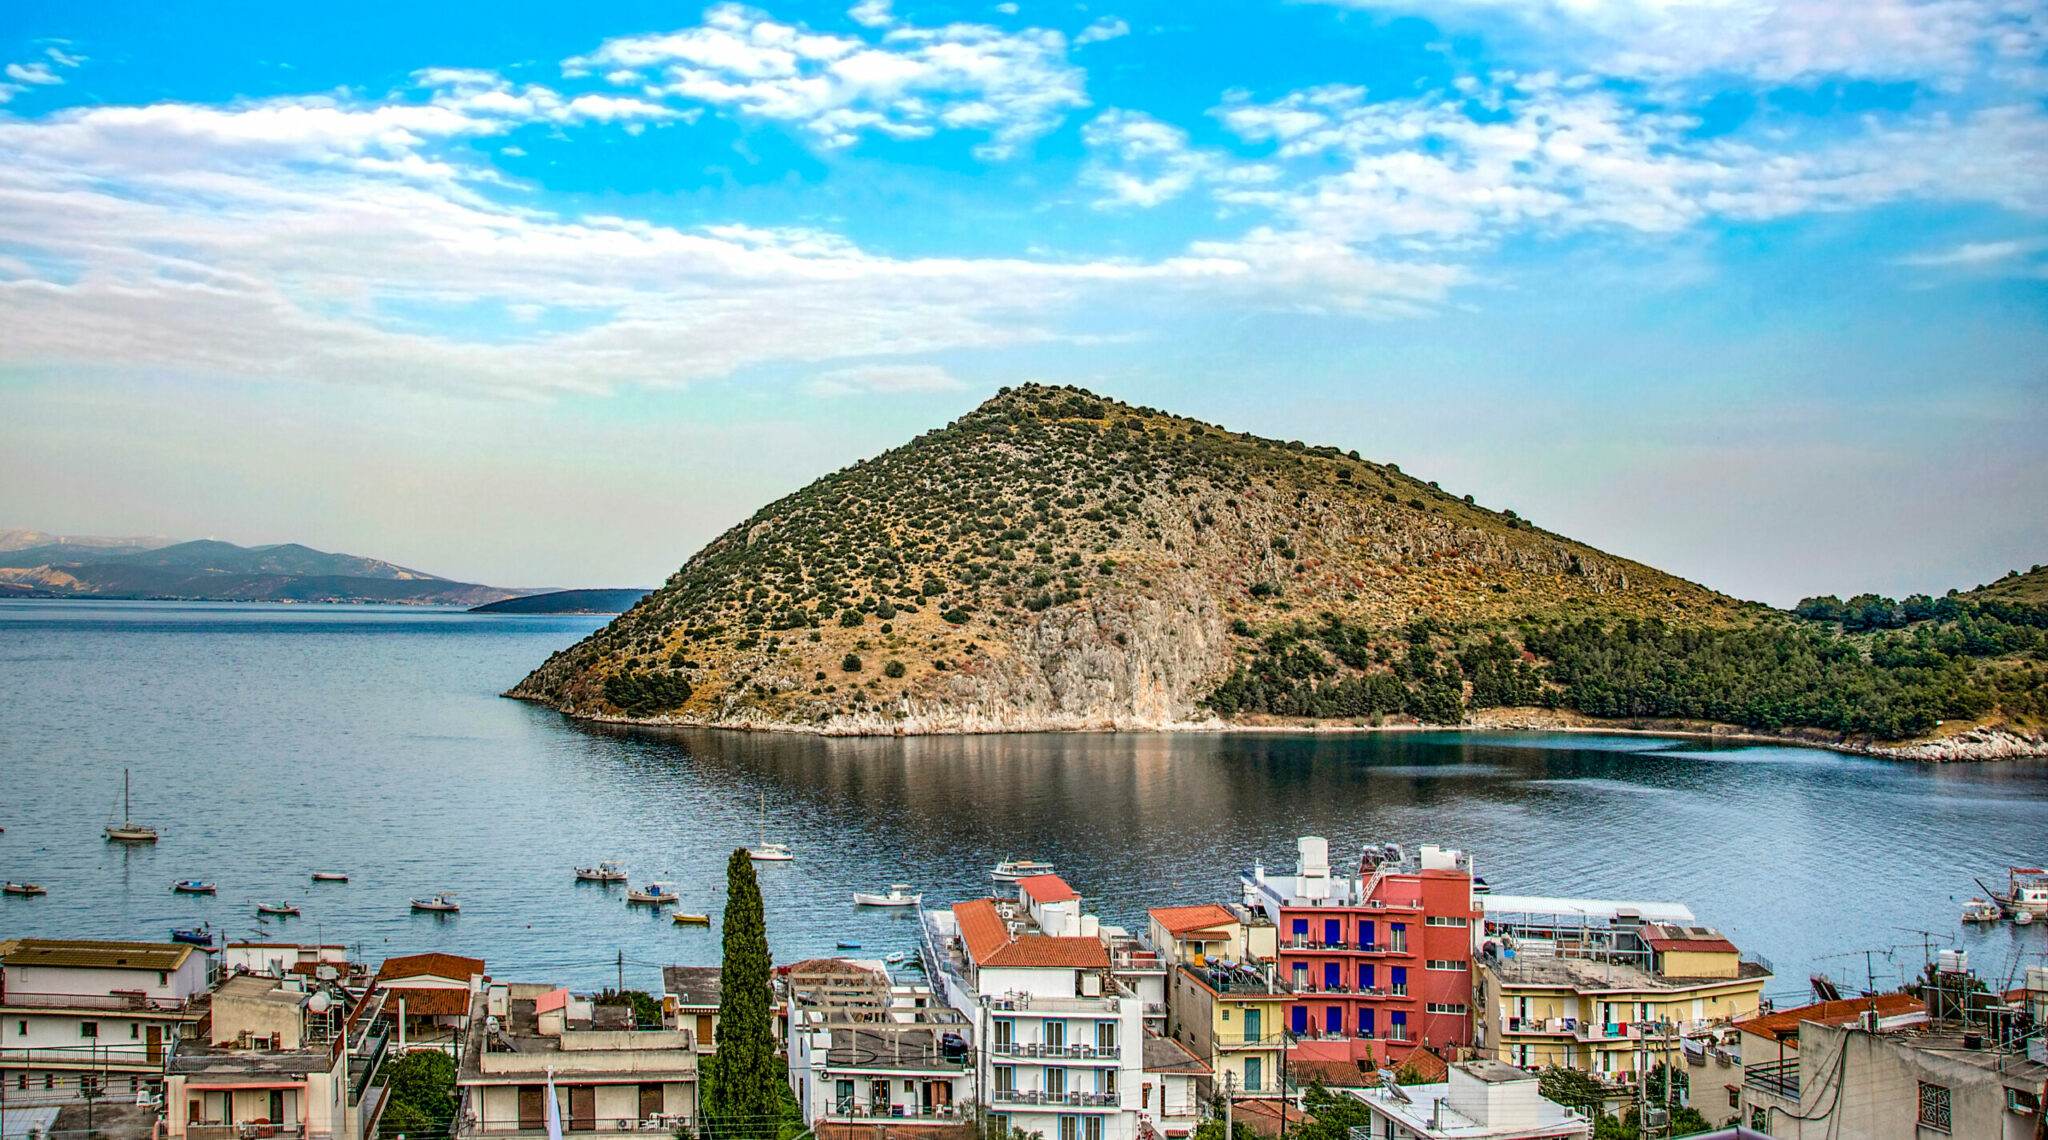 cities to visit near athens greece